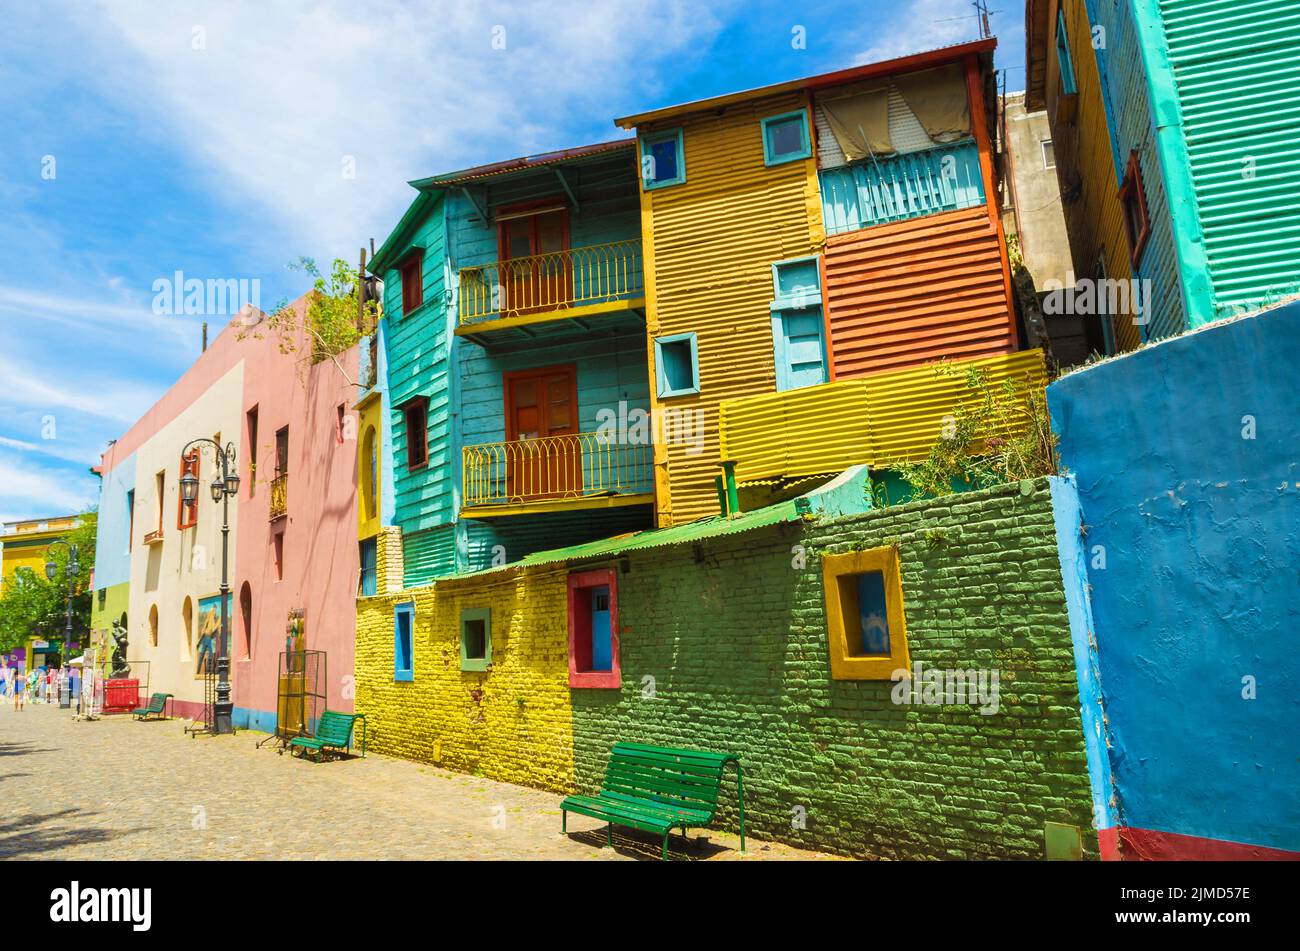 Bright colors of Caminito, the colorful street museum in La Boca neighborhood of Buenos Aires, Argen Stock Photo